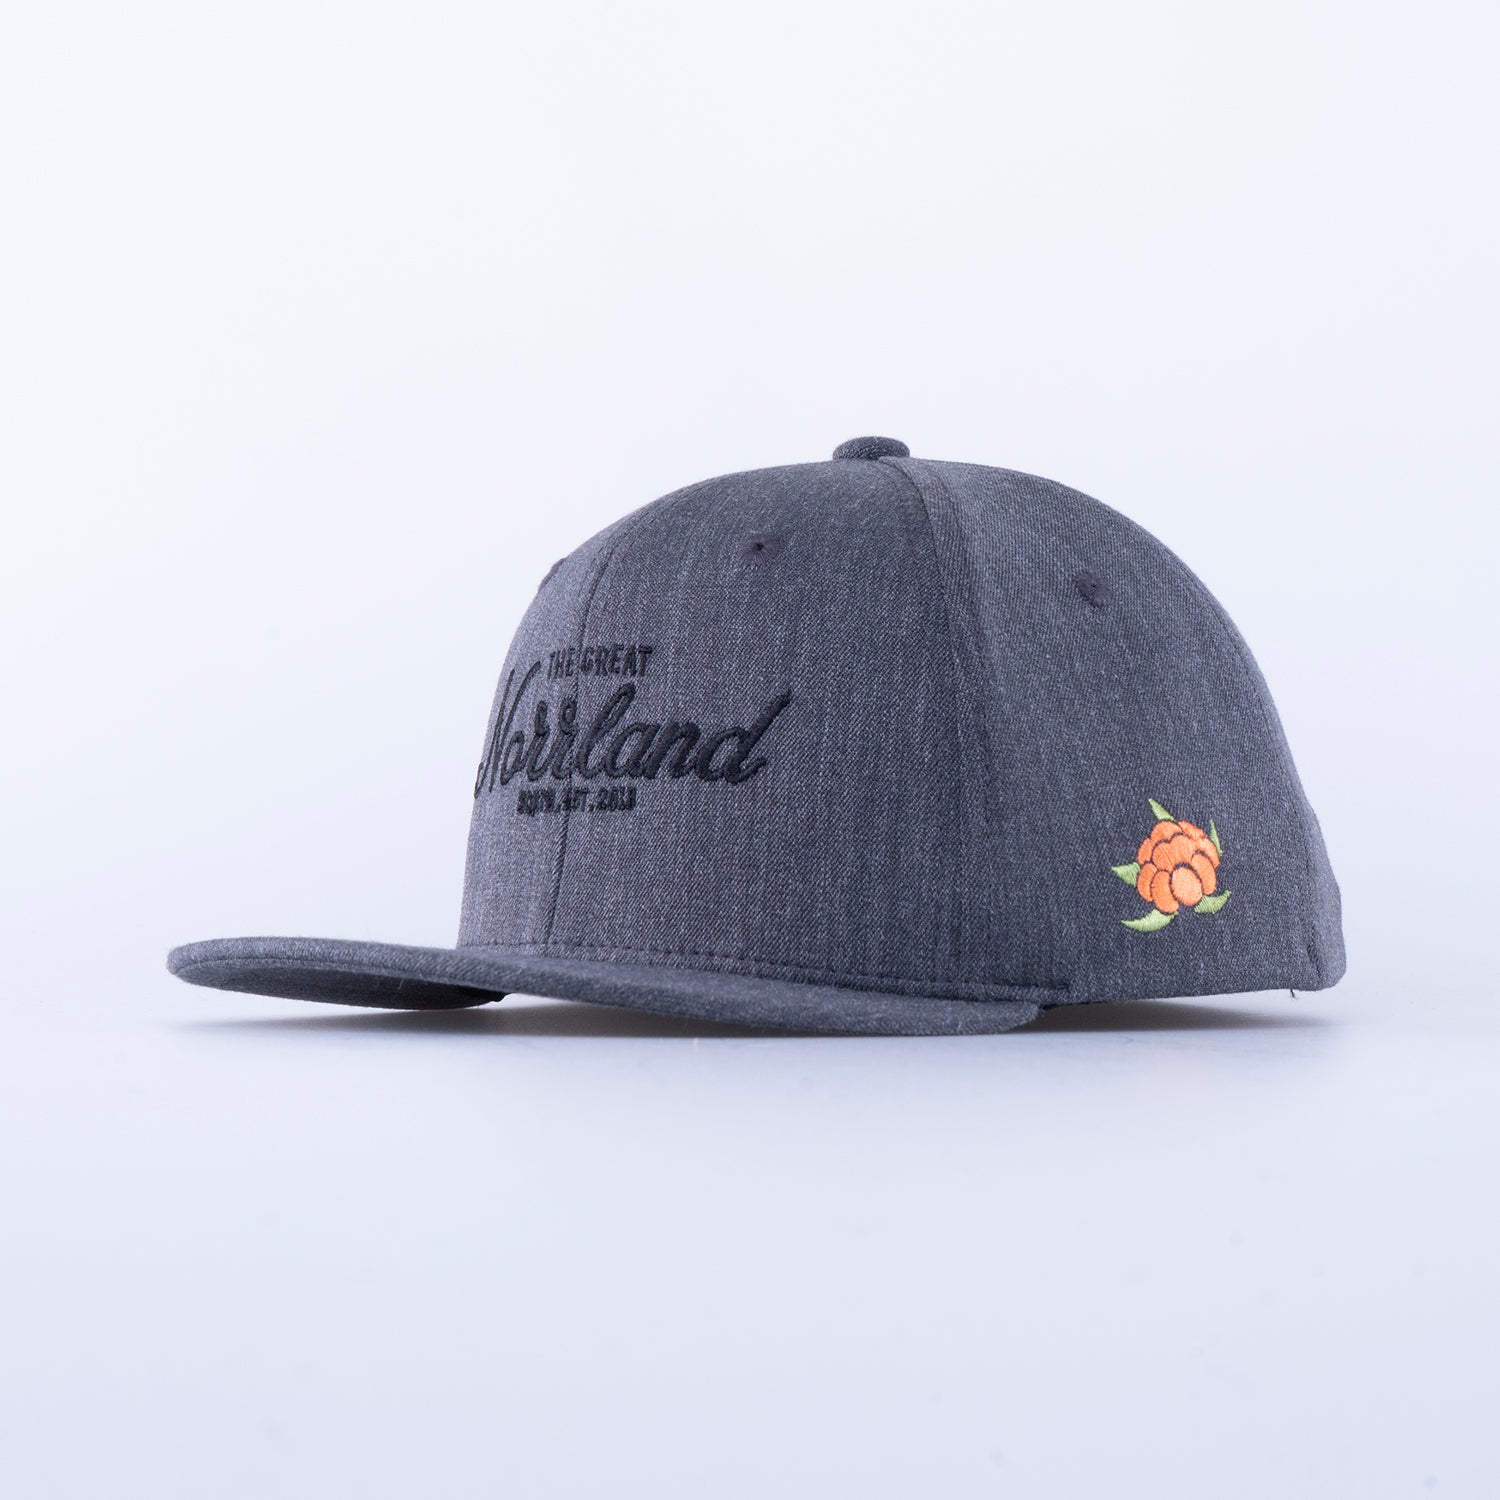 GREAT NORRLAND KIDS CAP - CHARCOAL